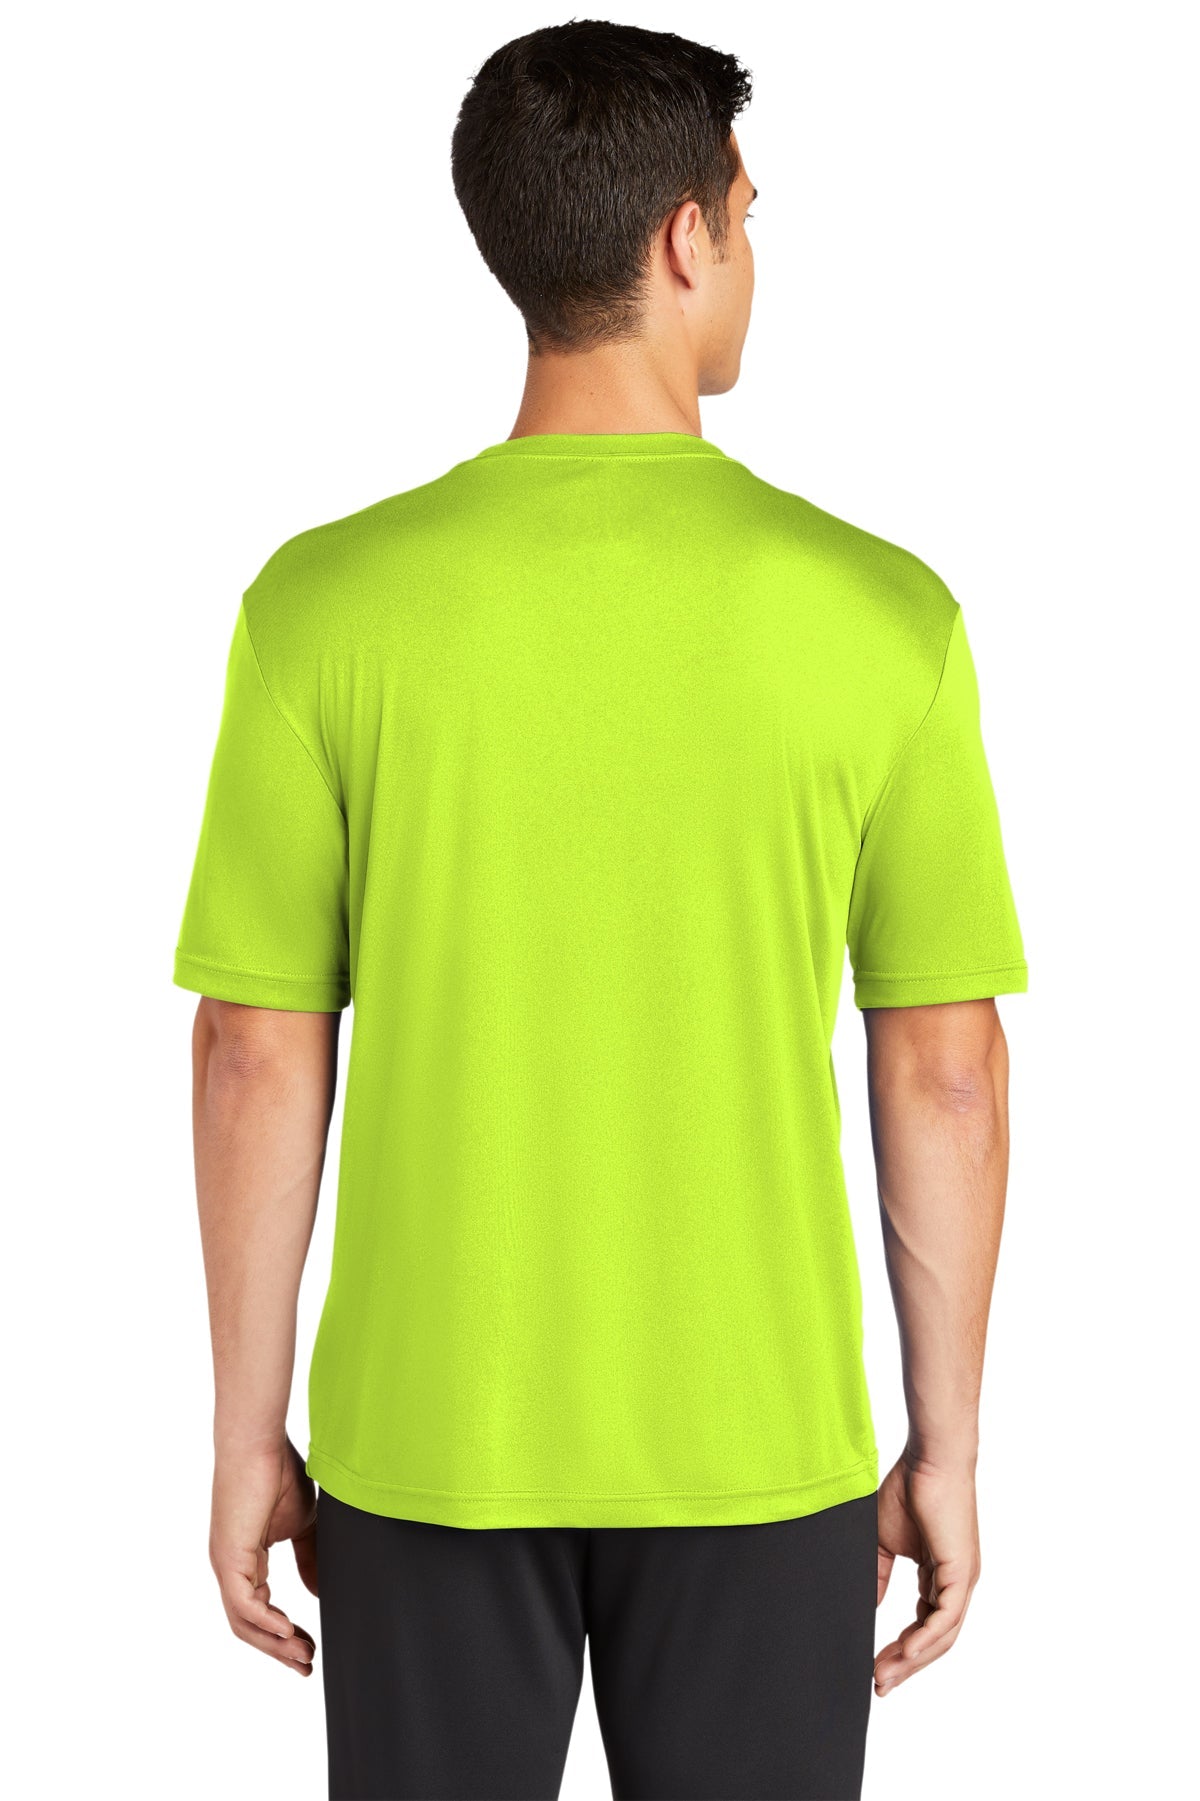 Sport-Tek Tall PosiCharge Customized Competitor Tee's, Neon Yellow